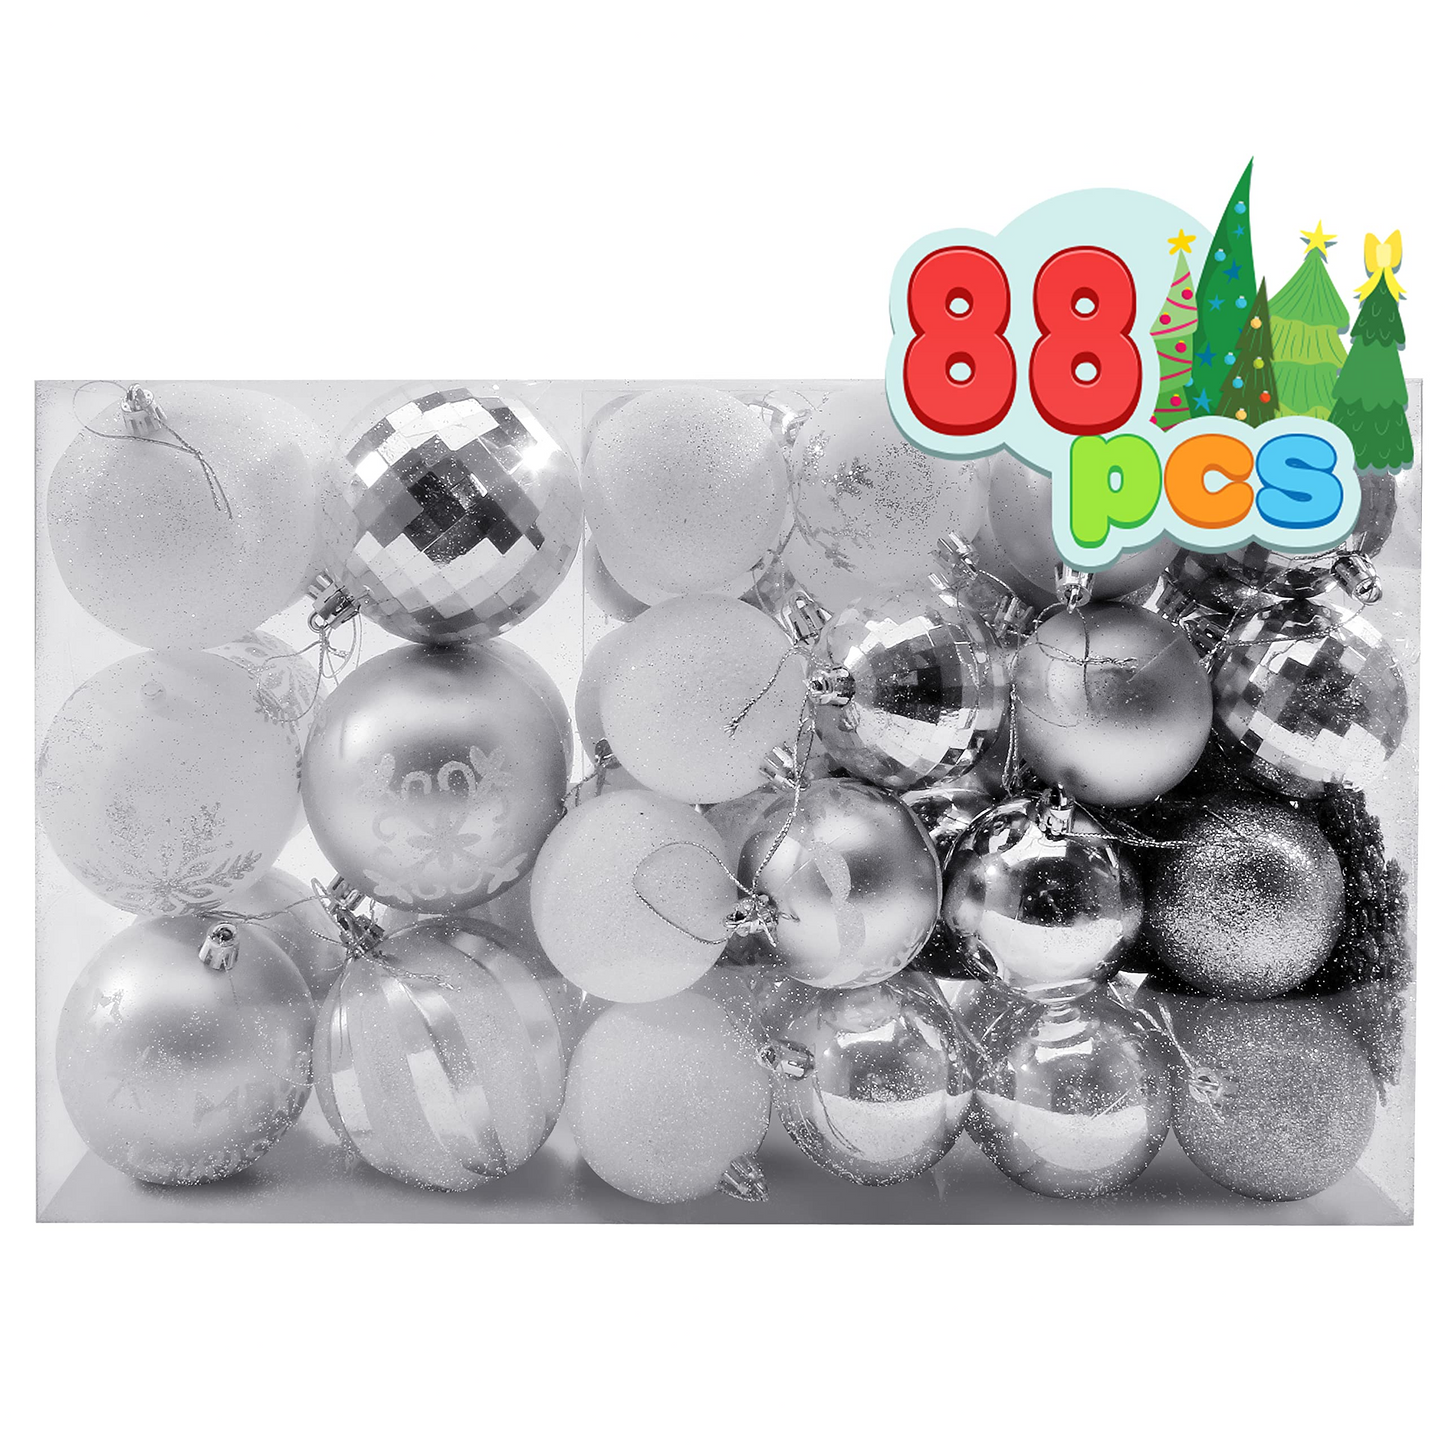 88 Pcs Assorted Shatterproof Silver & White Christmas Ornaments